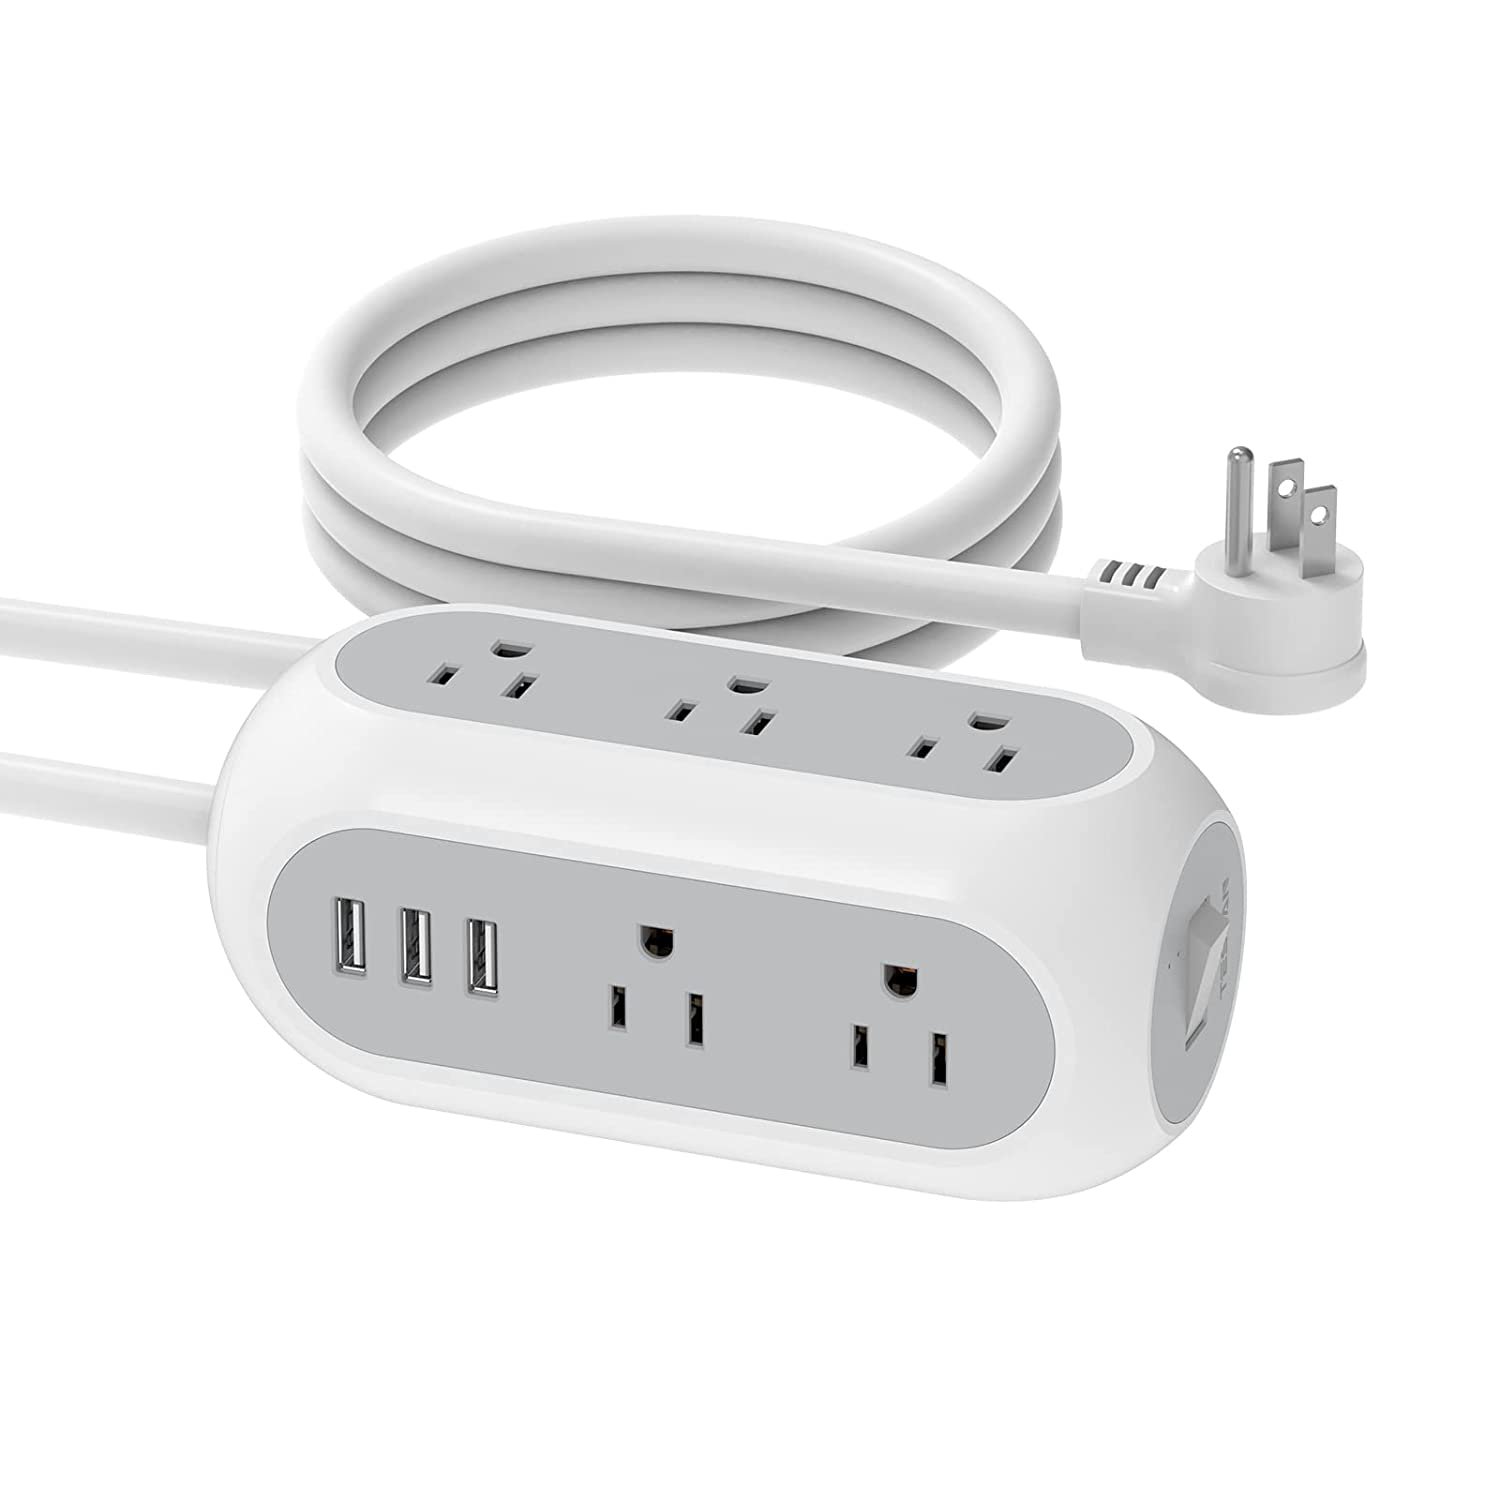 Surge Protector Power Strip With 3 Usb, Flat Plug Dorm Extension Cord With Multiple Outlet